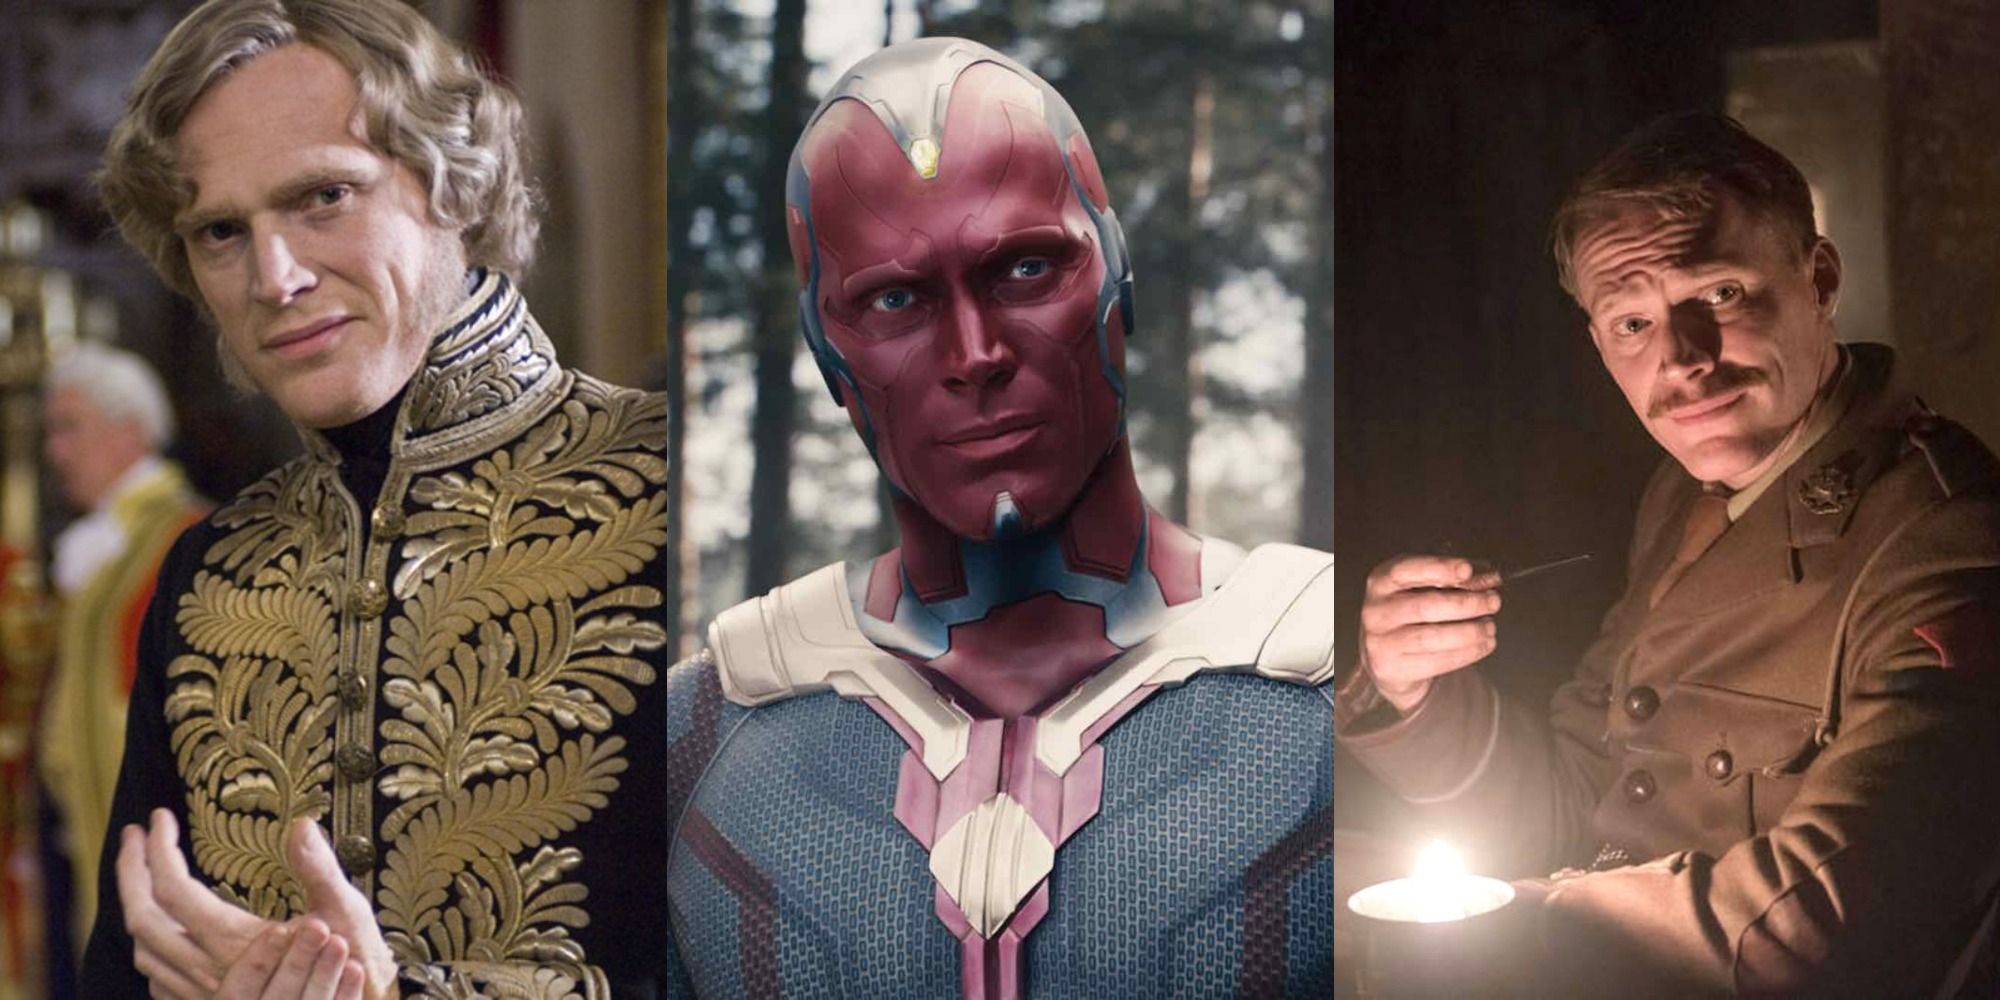 Combined images of Paul Bettany in The Young Victoria, Journey's End, and as Vision in the MCU